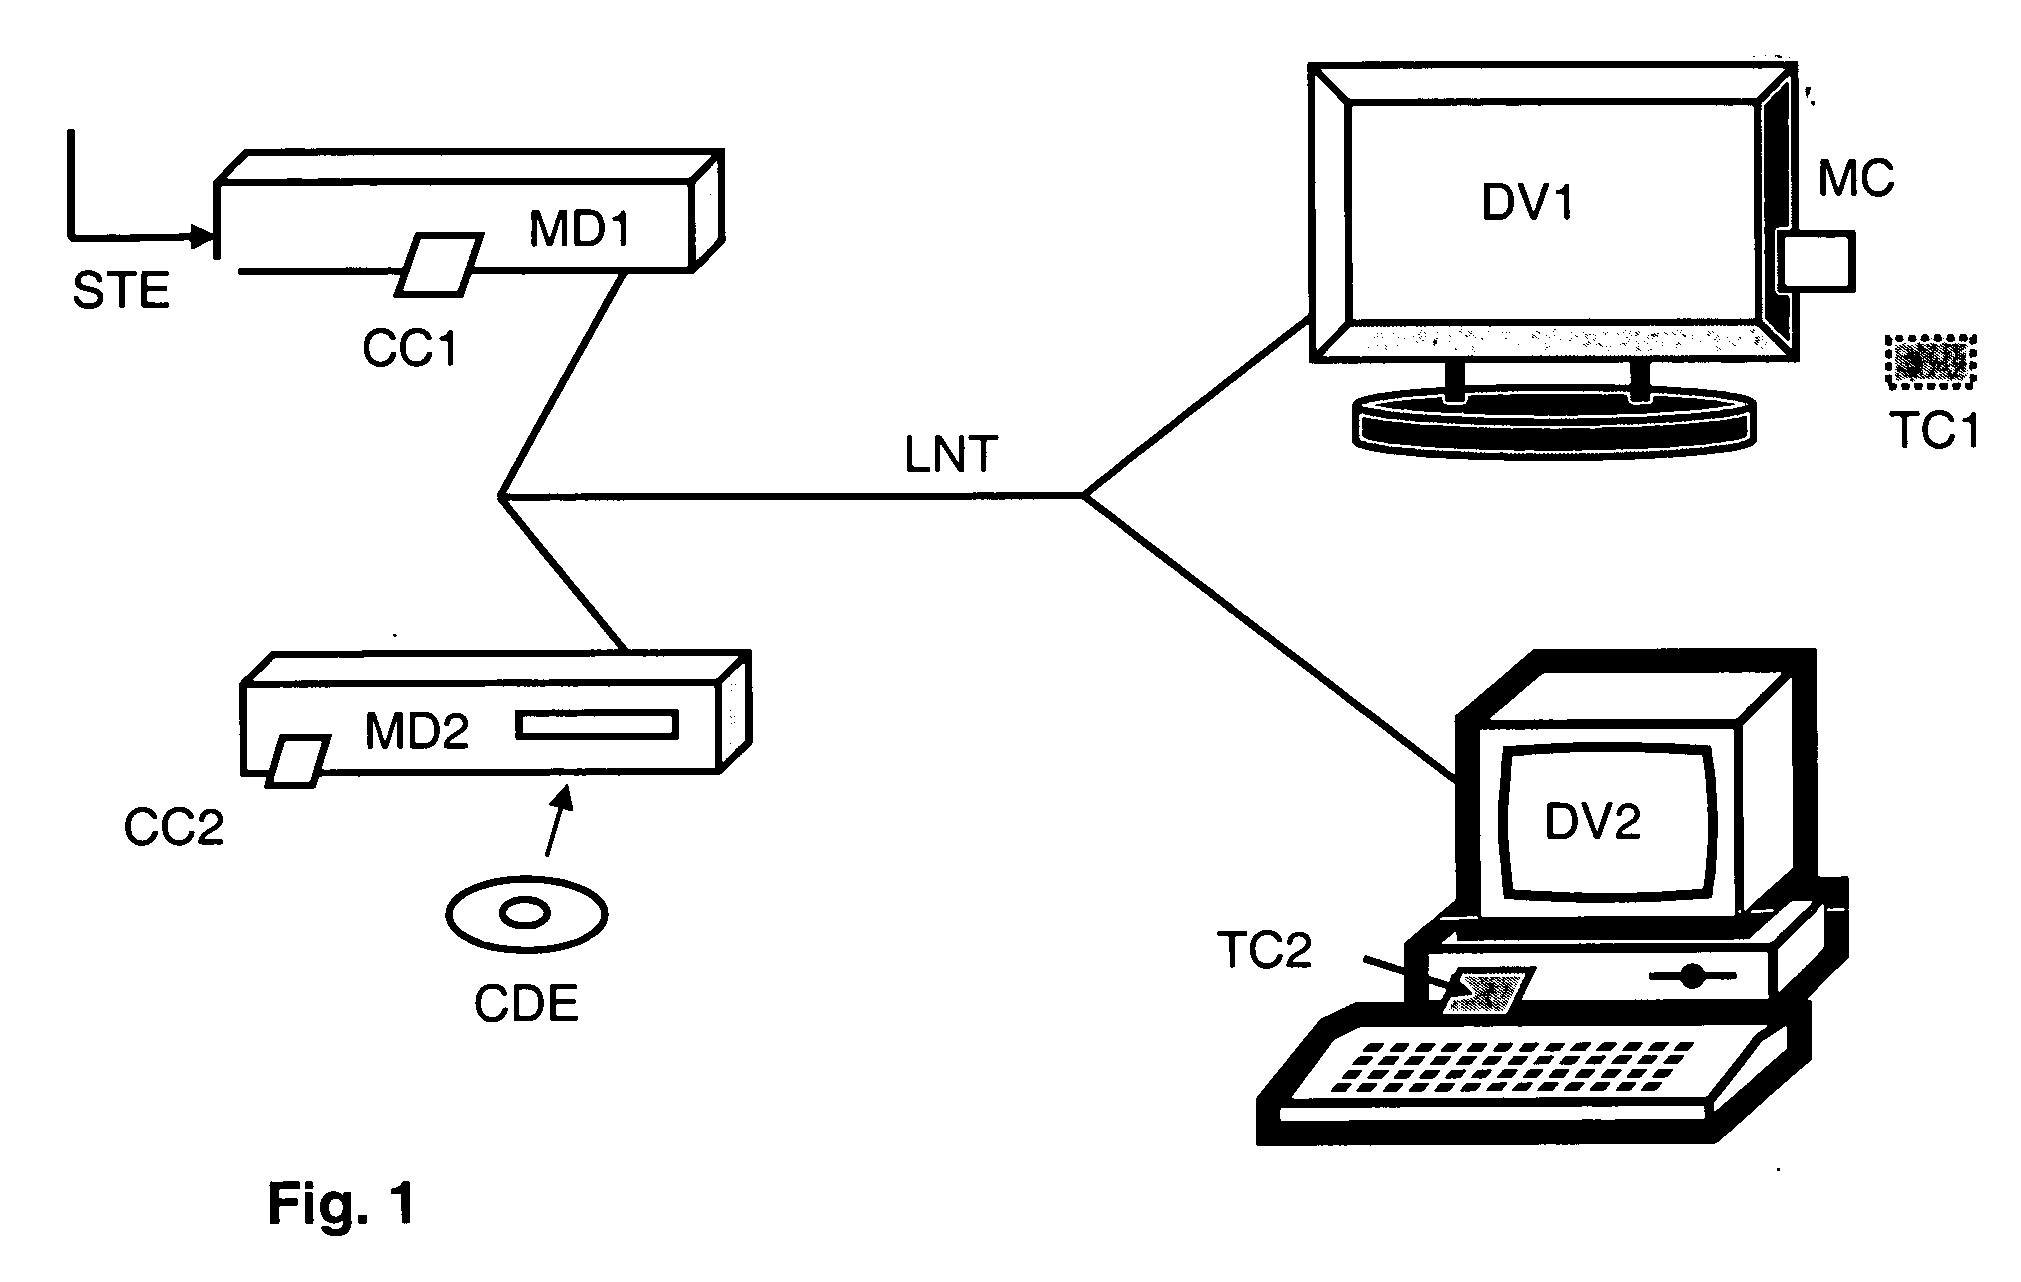 Method for generating and managing a local area network